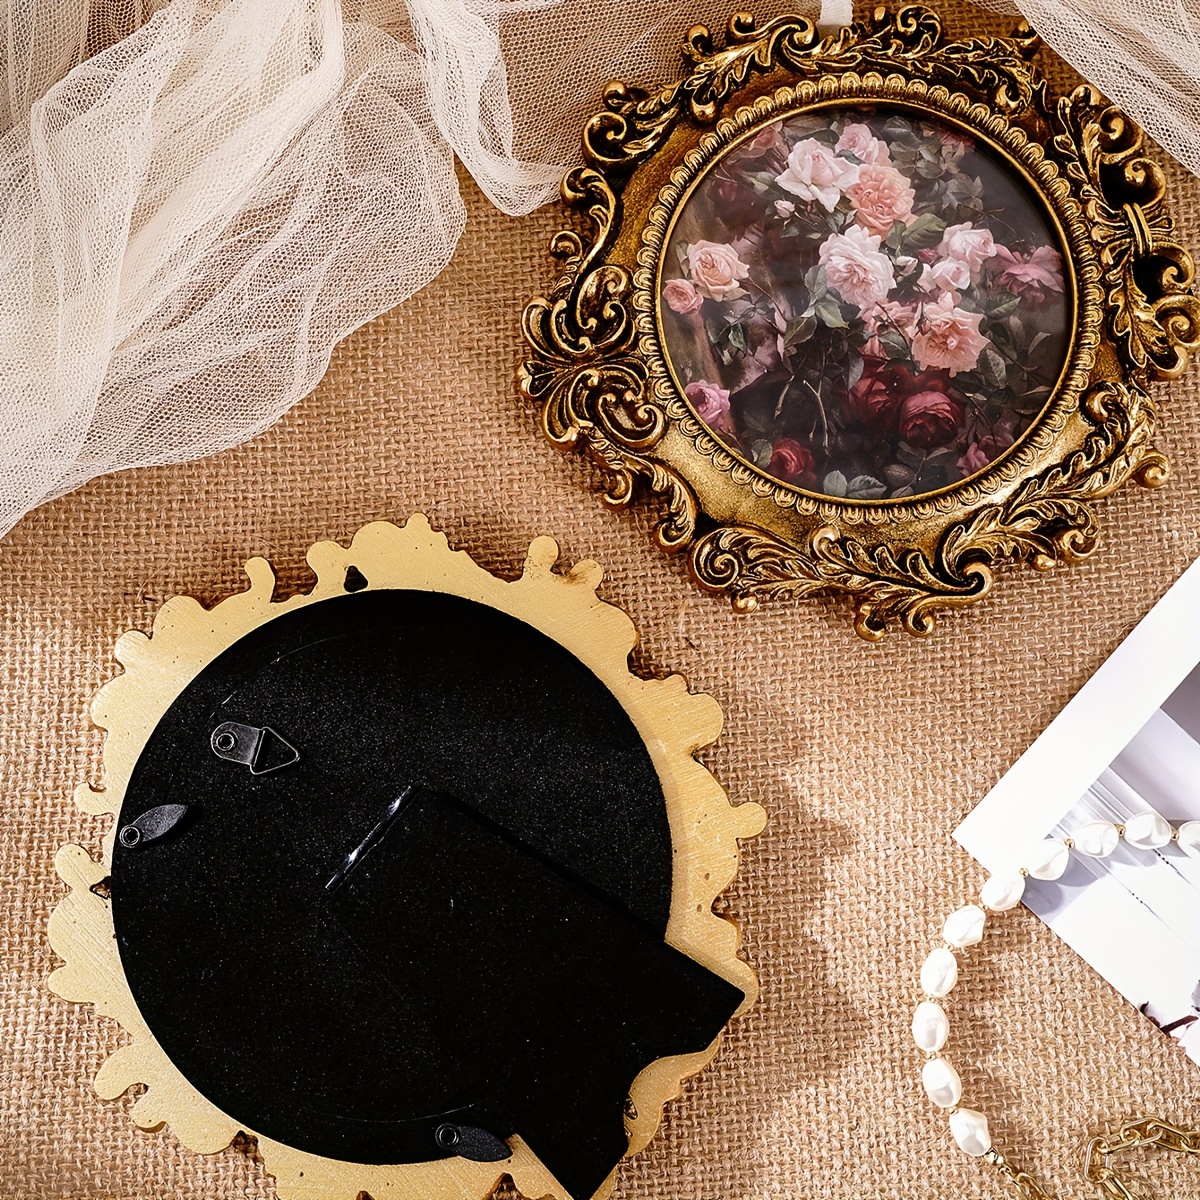 

Vintage-inspired Round Photo Frame With Golden Trim - Versatile Tabletop Or Wall Mount, Resin Decor Vintage Decor For Home Tabletop Decor